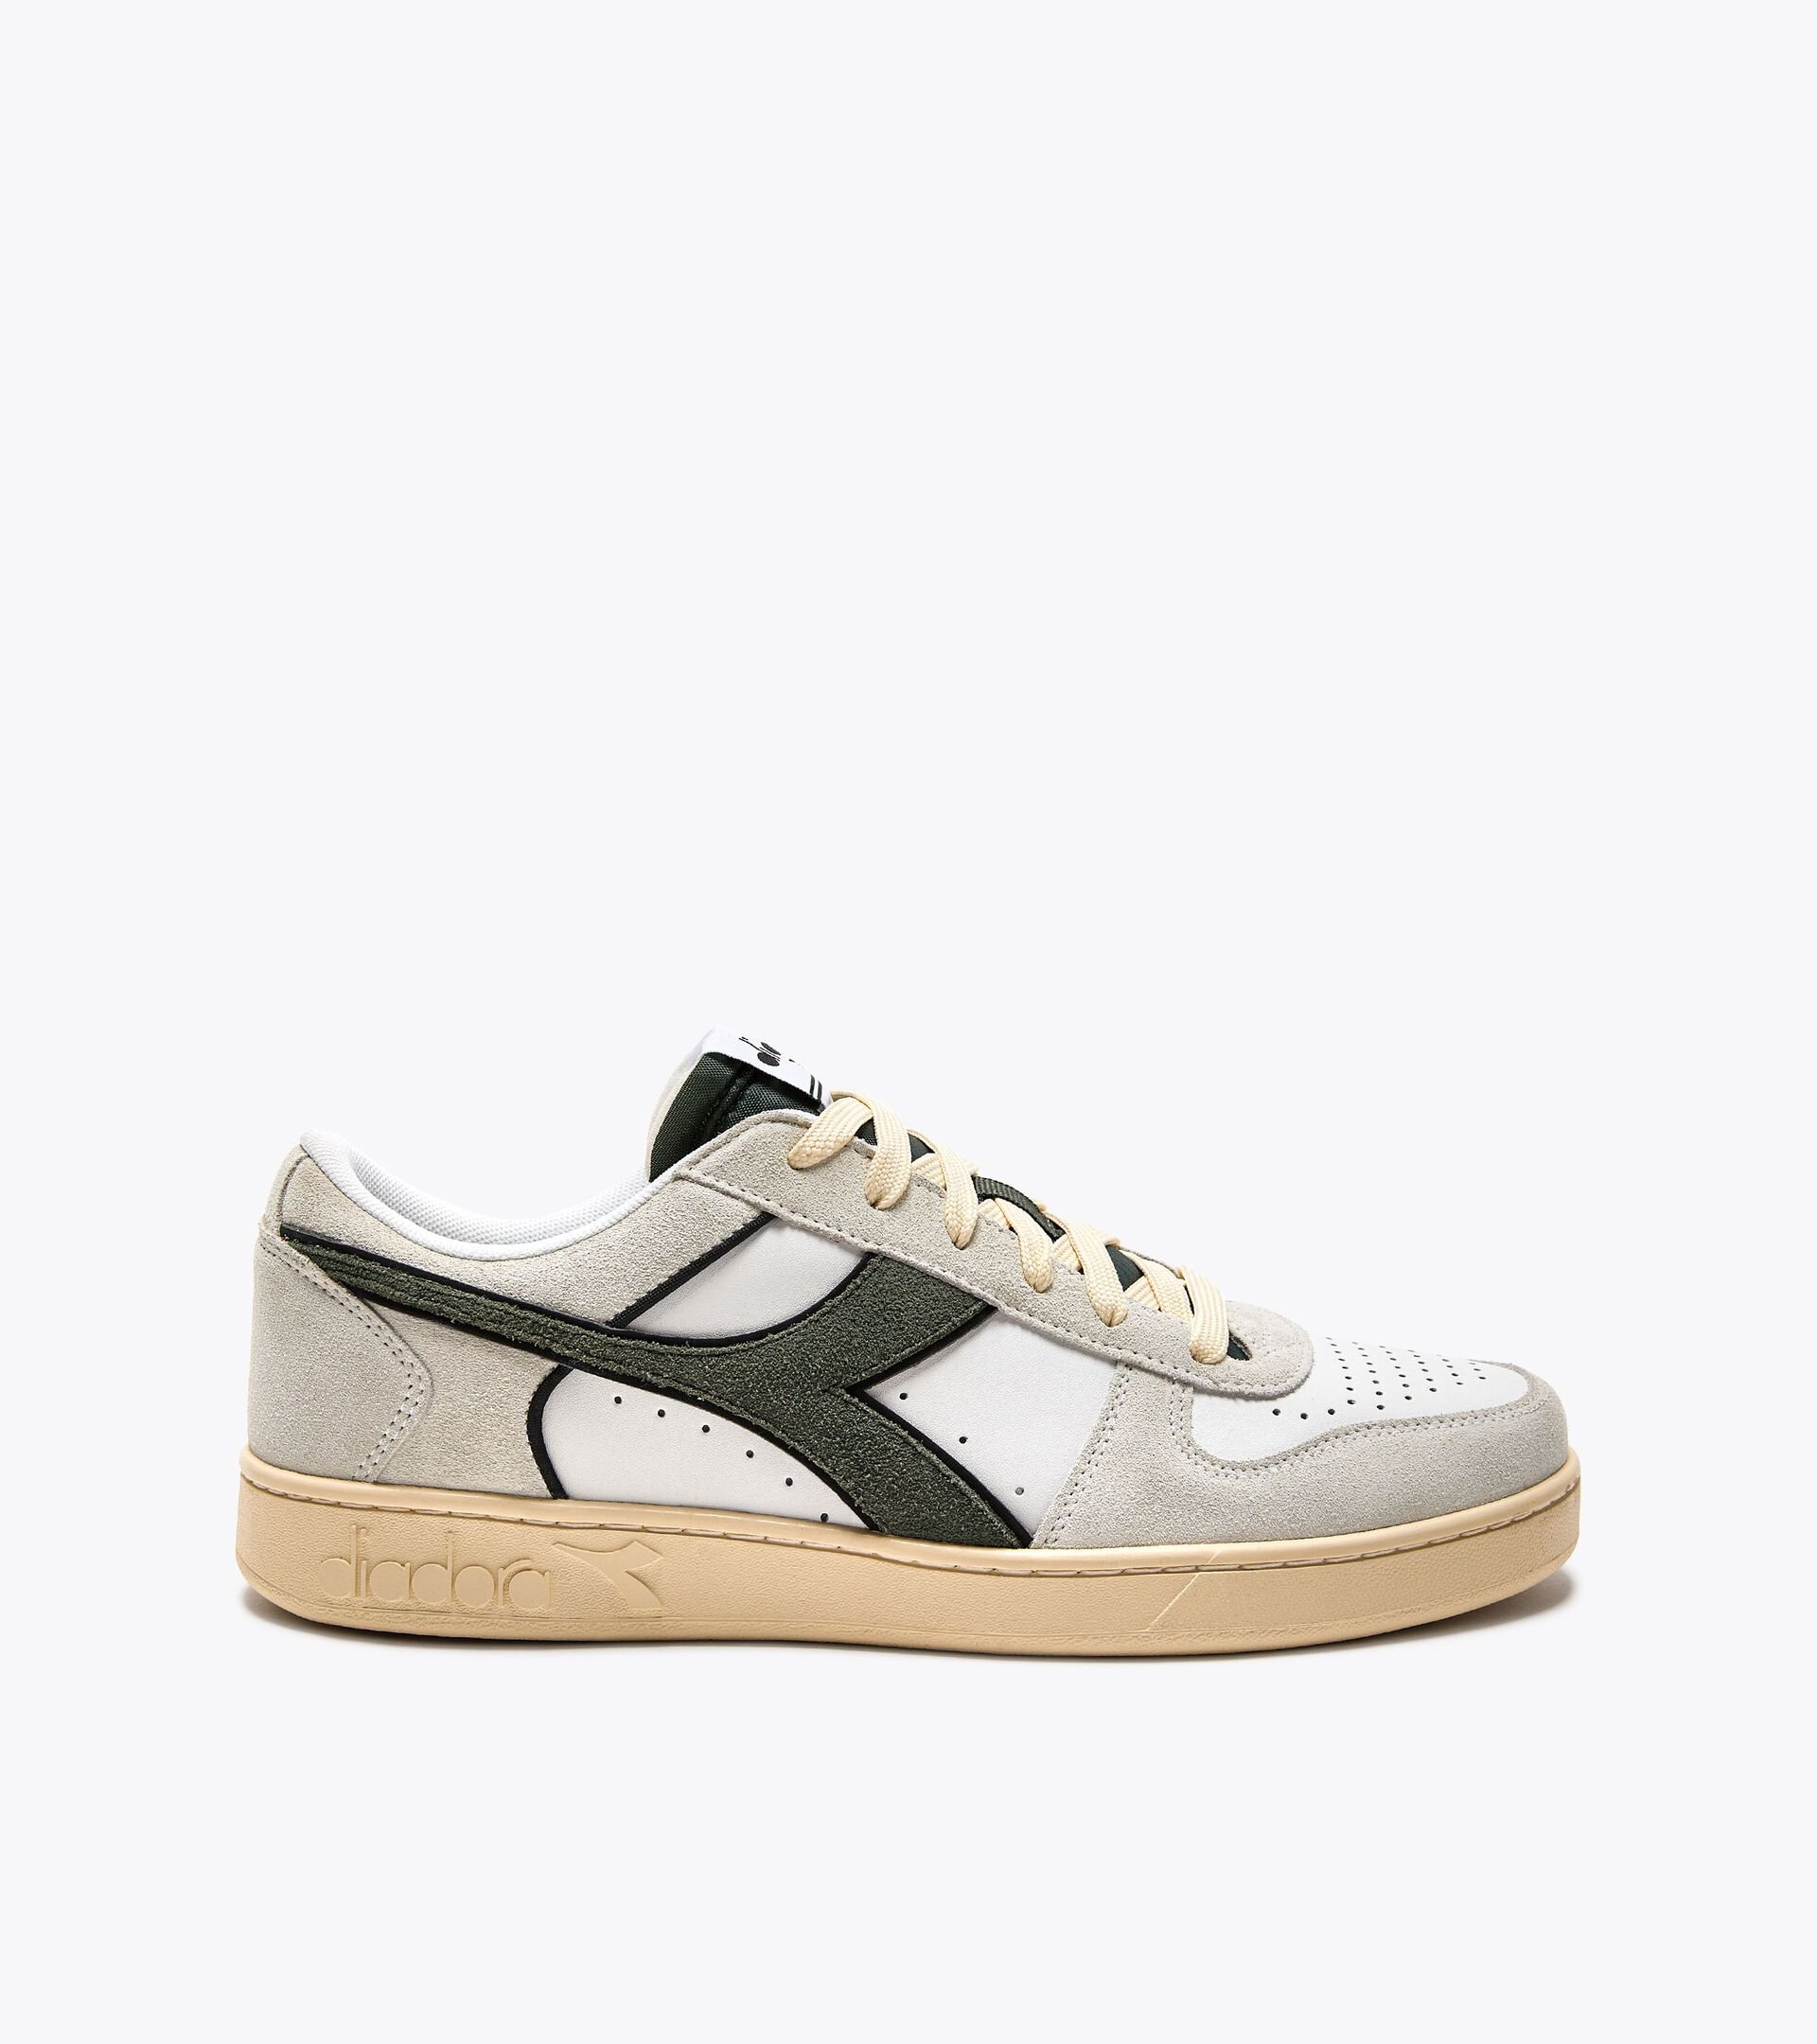 Sporty sneakers - Gender neutral MAGIC BASKET LOW SUEDE LEATHER WHITE/DARK FOREST - Diadora